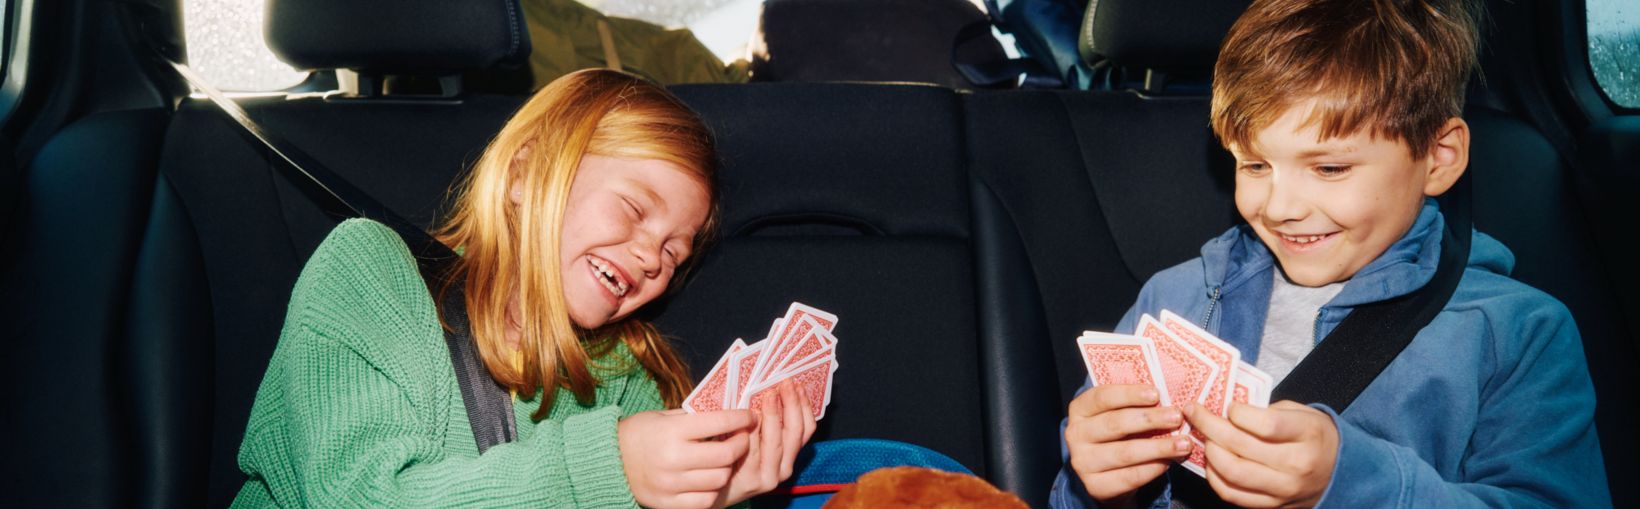 Kids in car playing cards